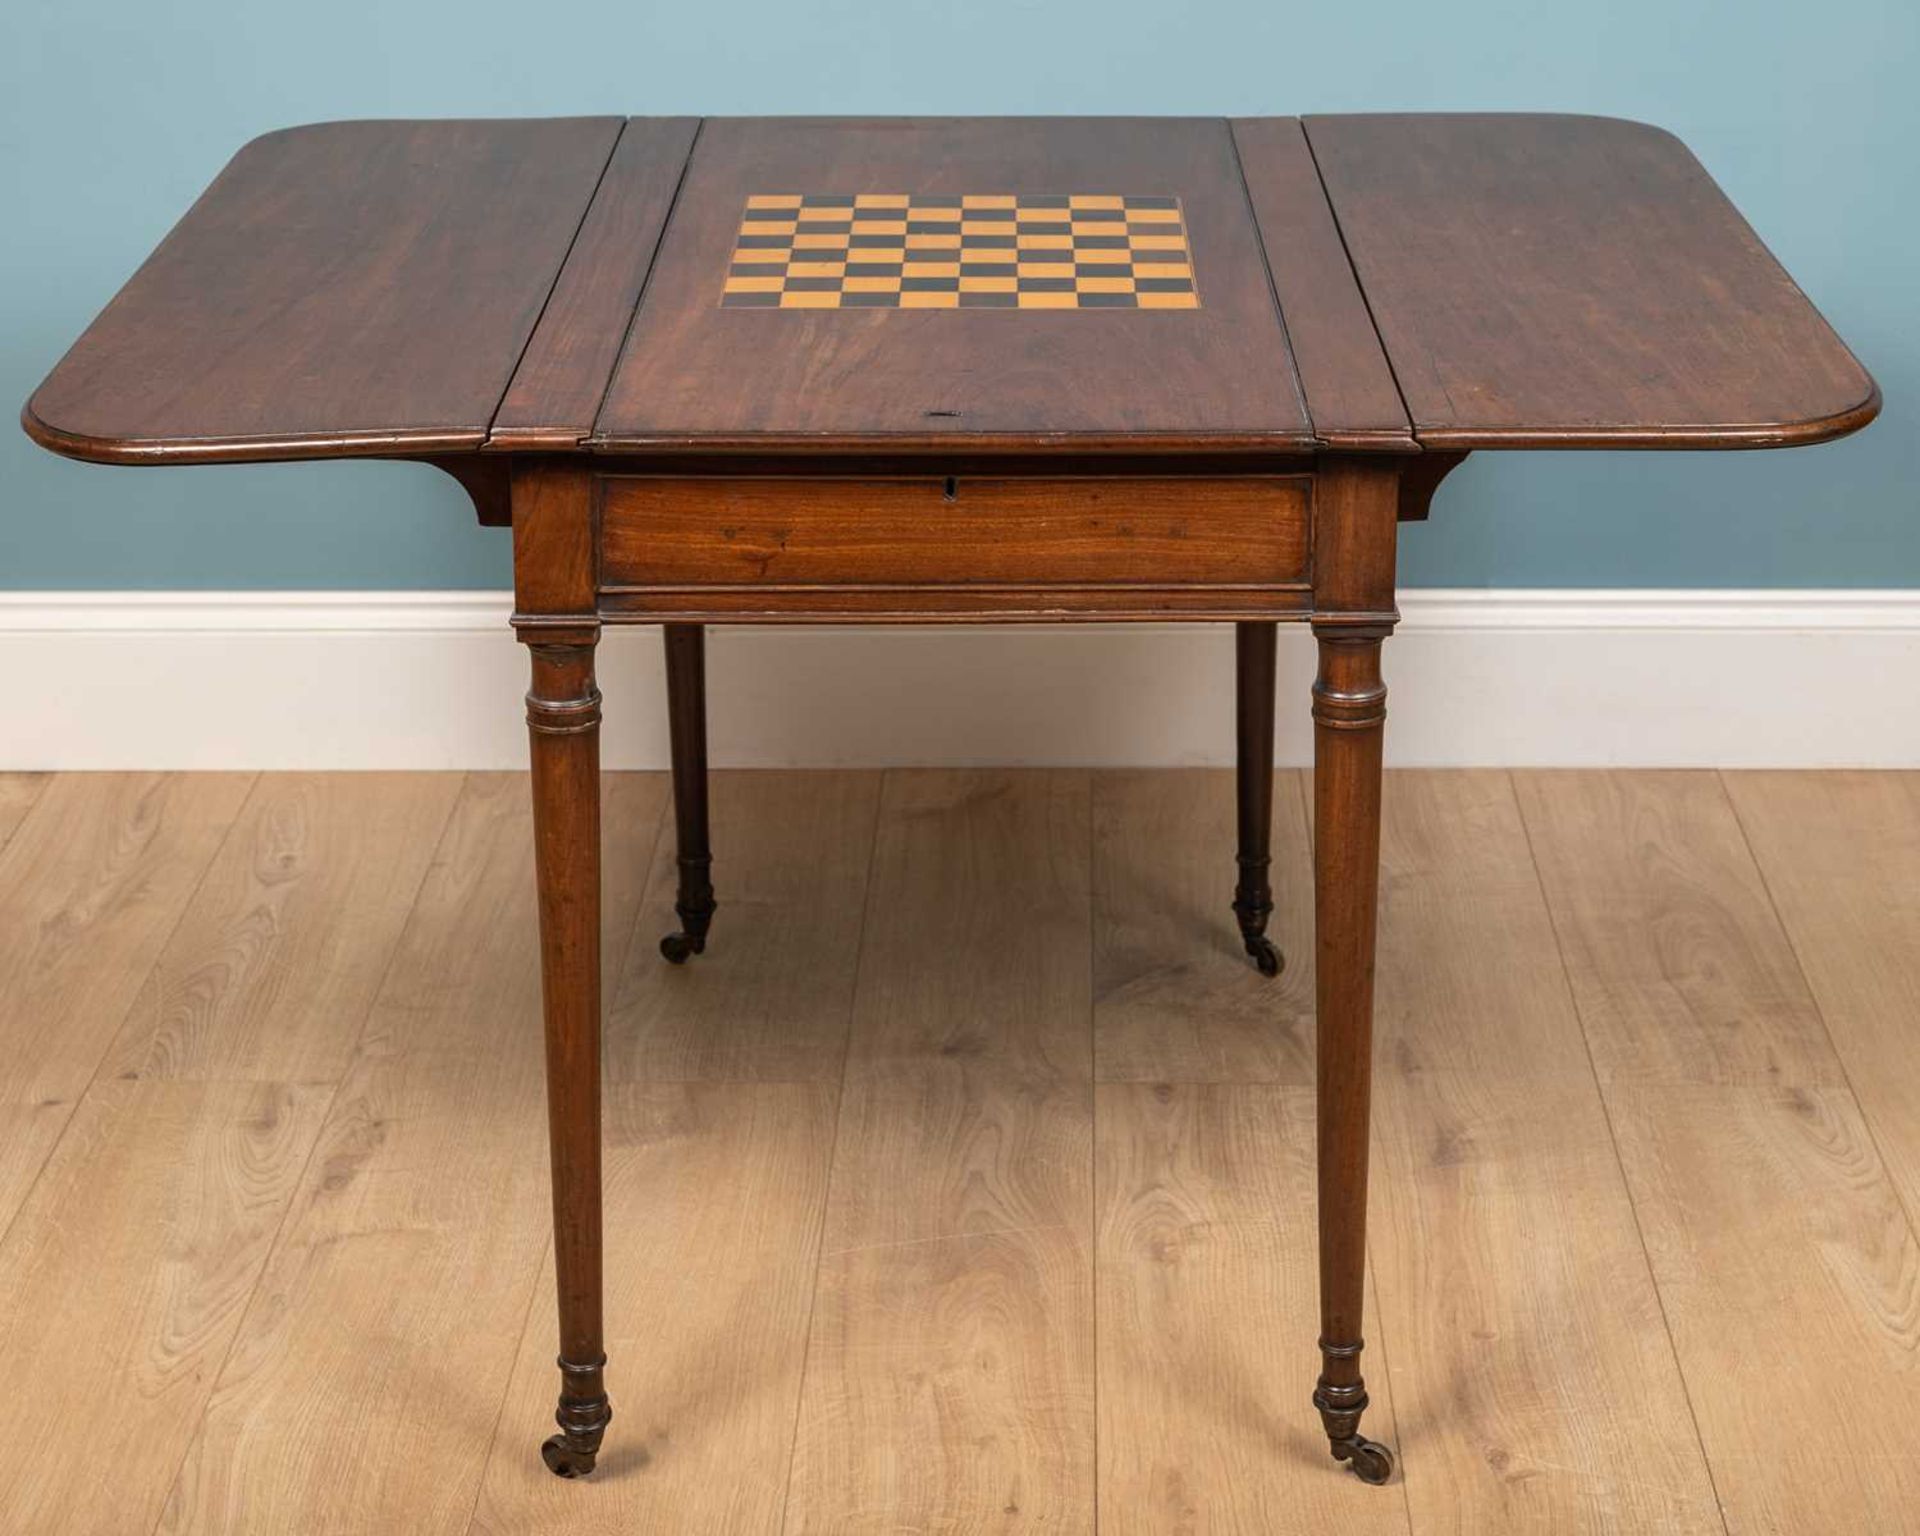 A George III mahogany games table with drop leaves - Image 7 of 9